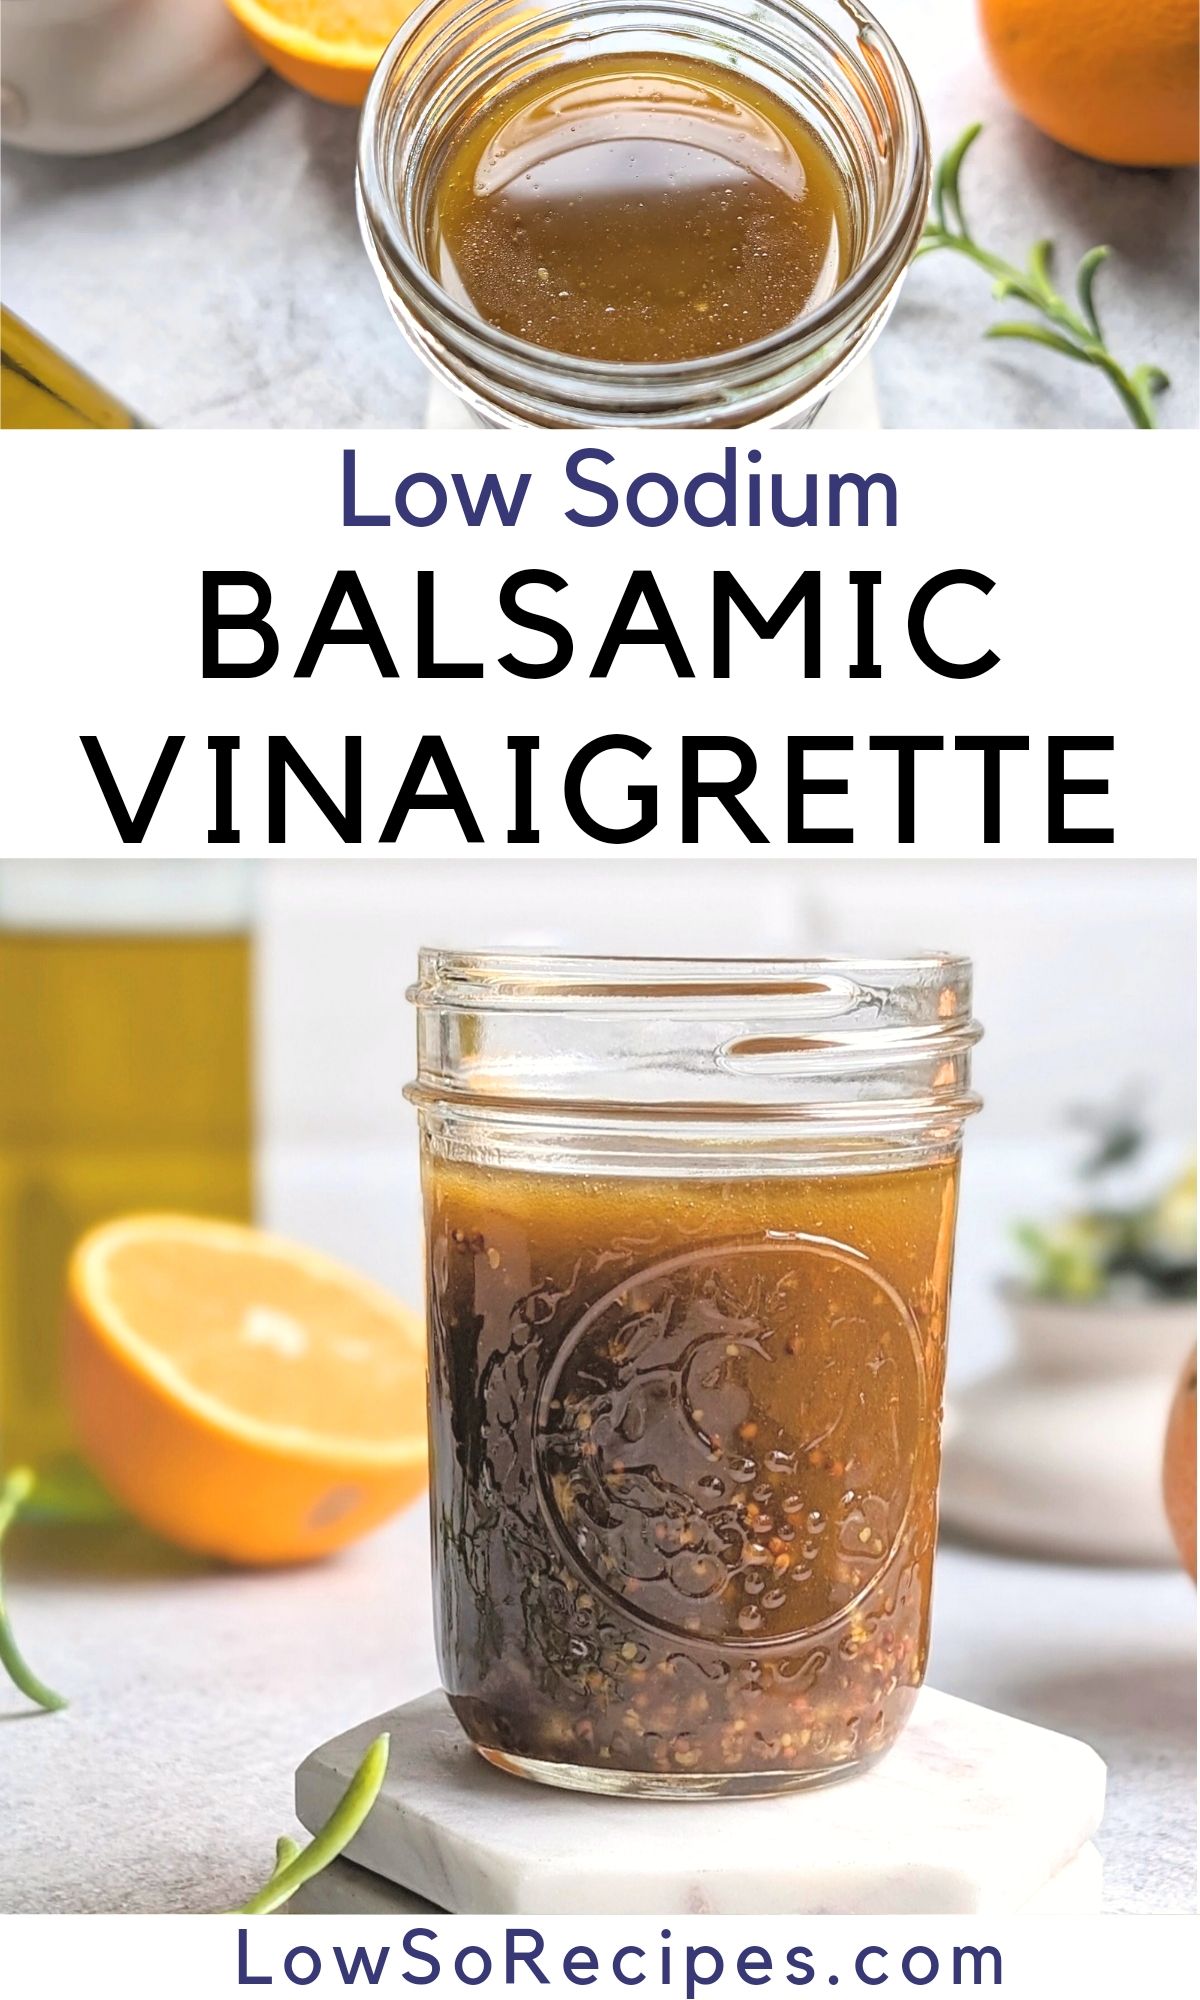 low sodium balsamic vinaigrette dressing recipe with no salt added salads easy homemade dressings without salt or preservatives